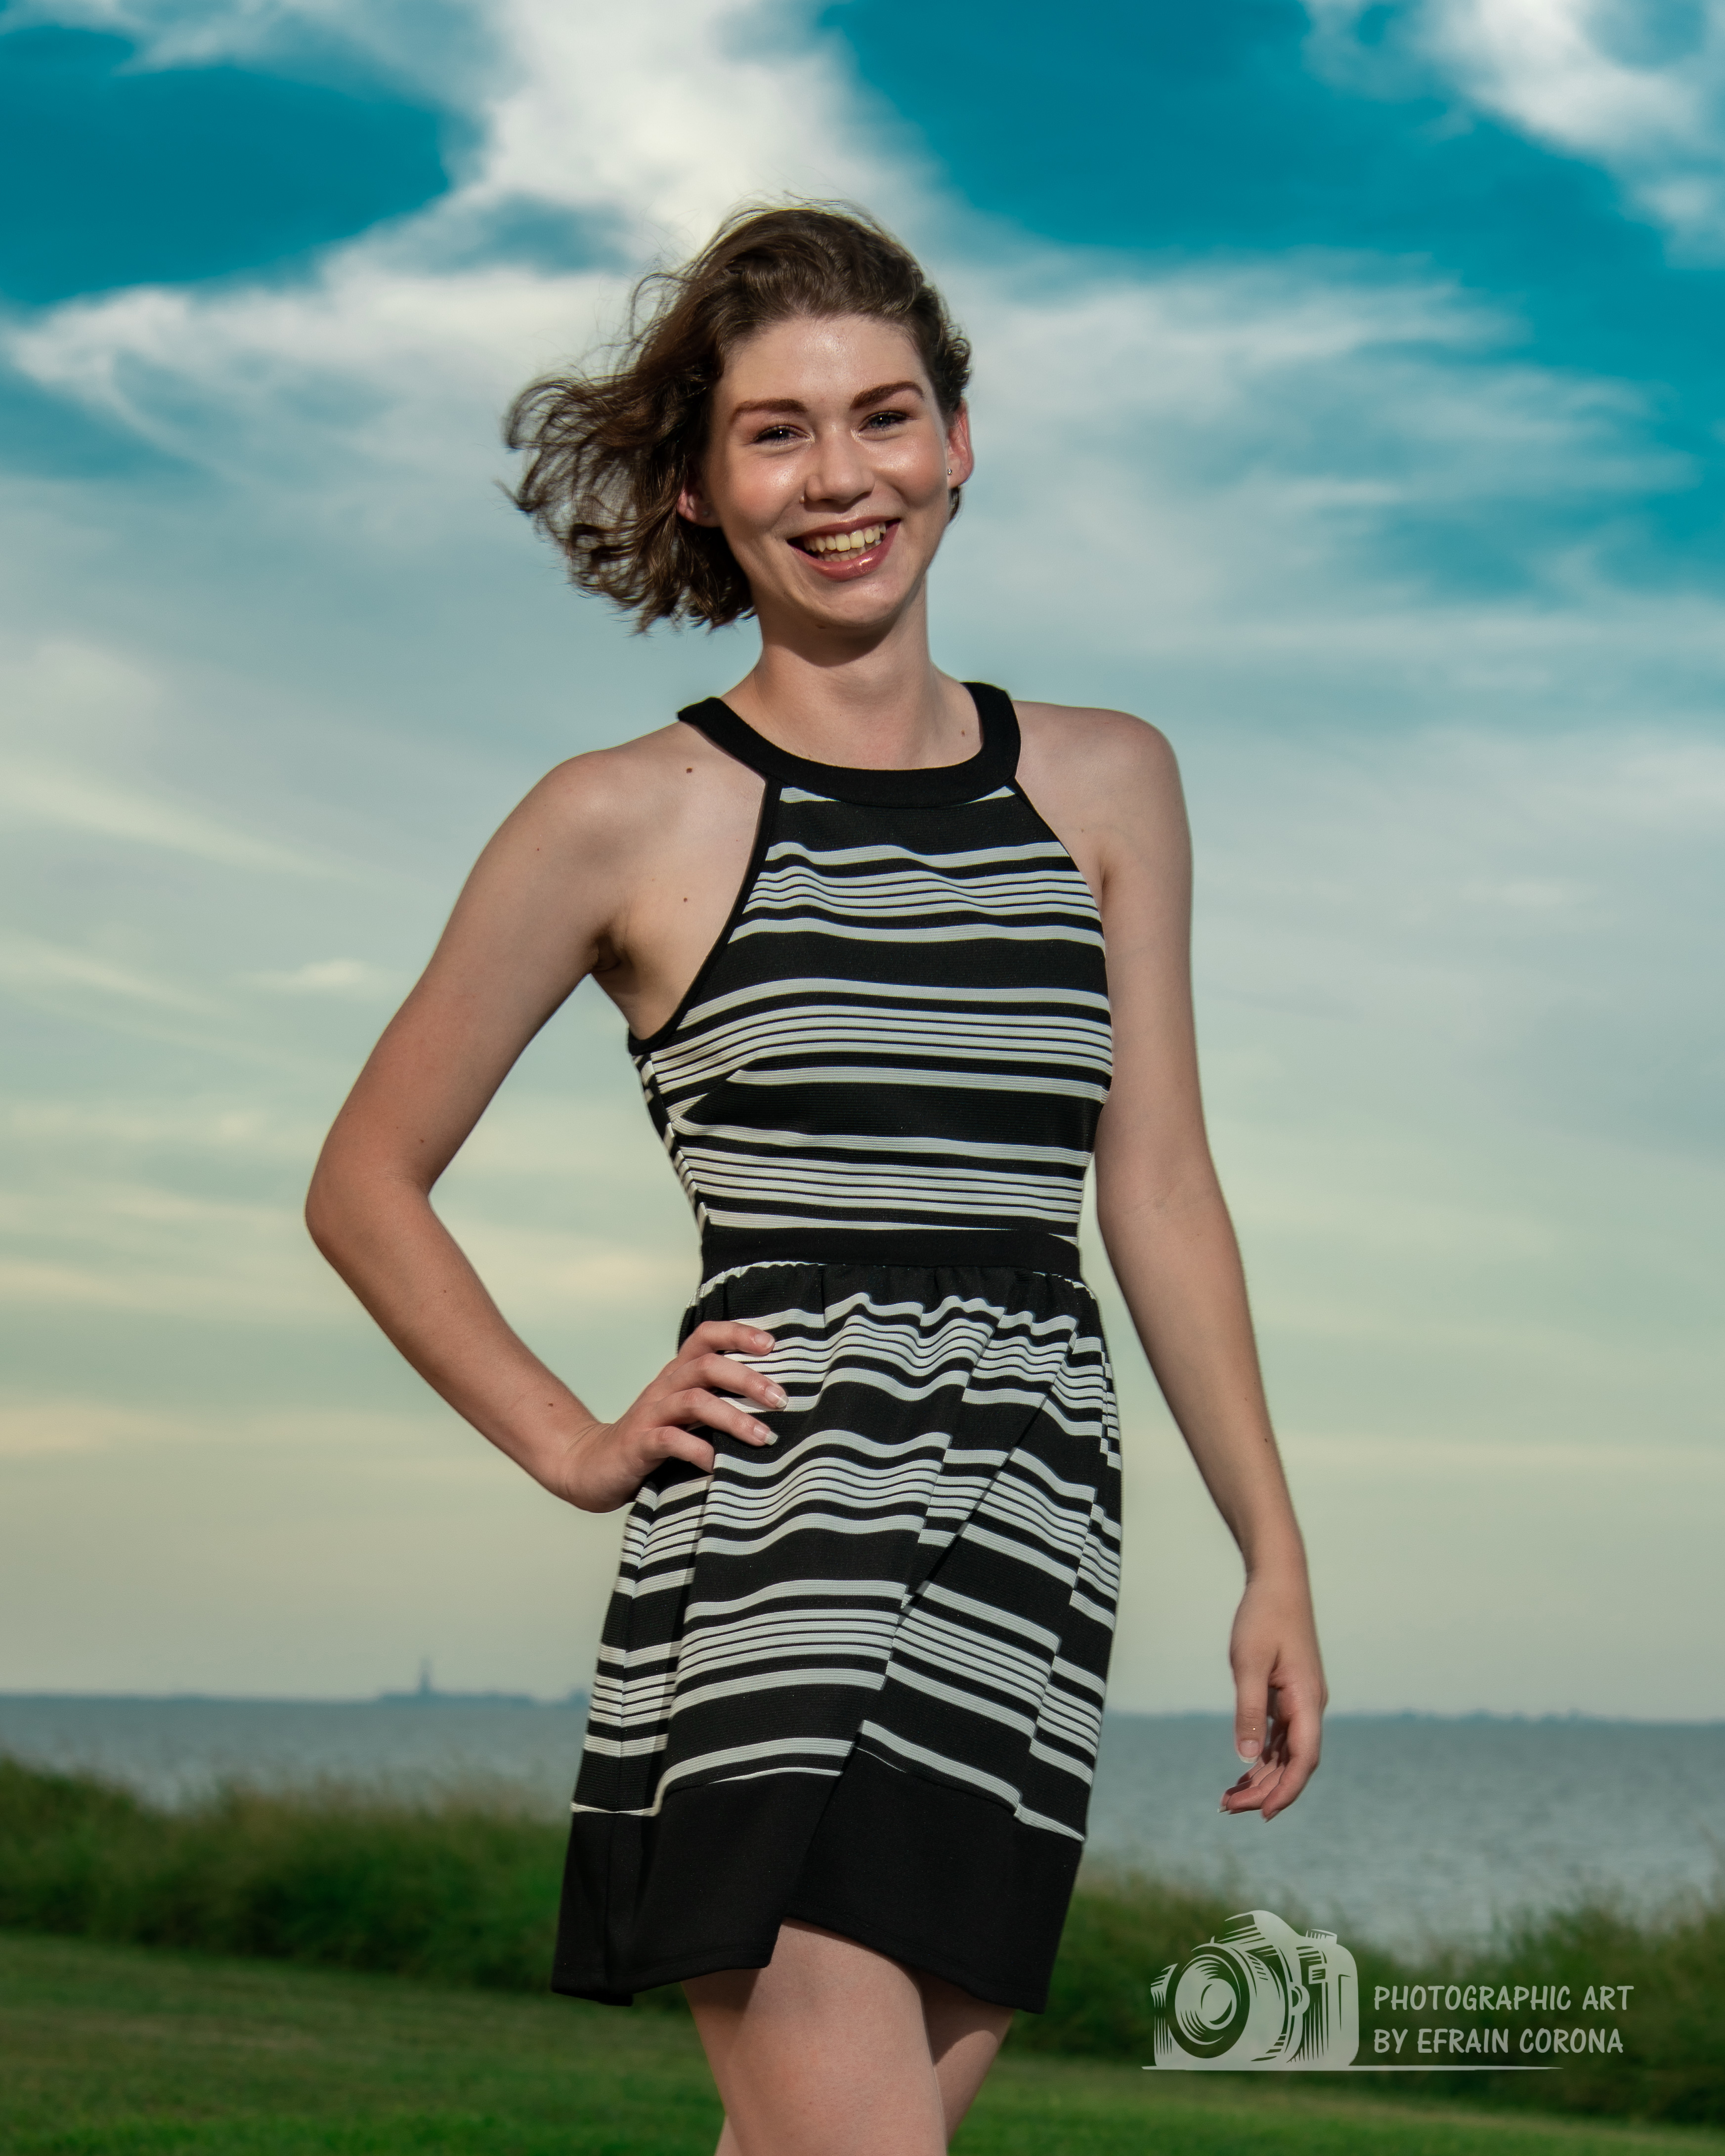 Hailey posing by the ocean in a black and white striped dress.